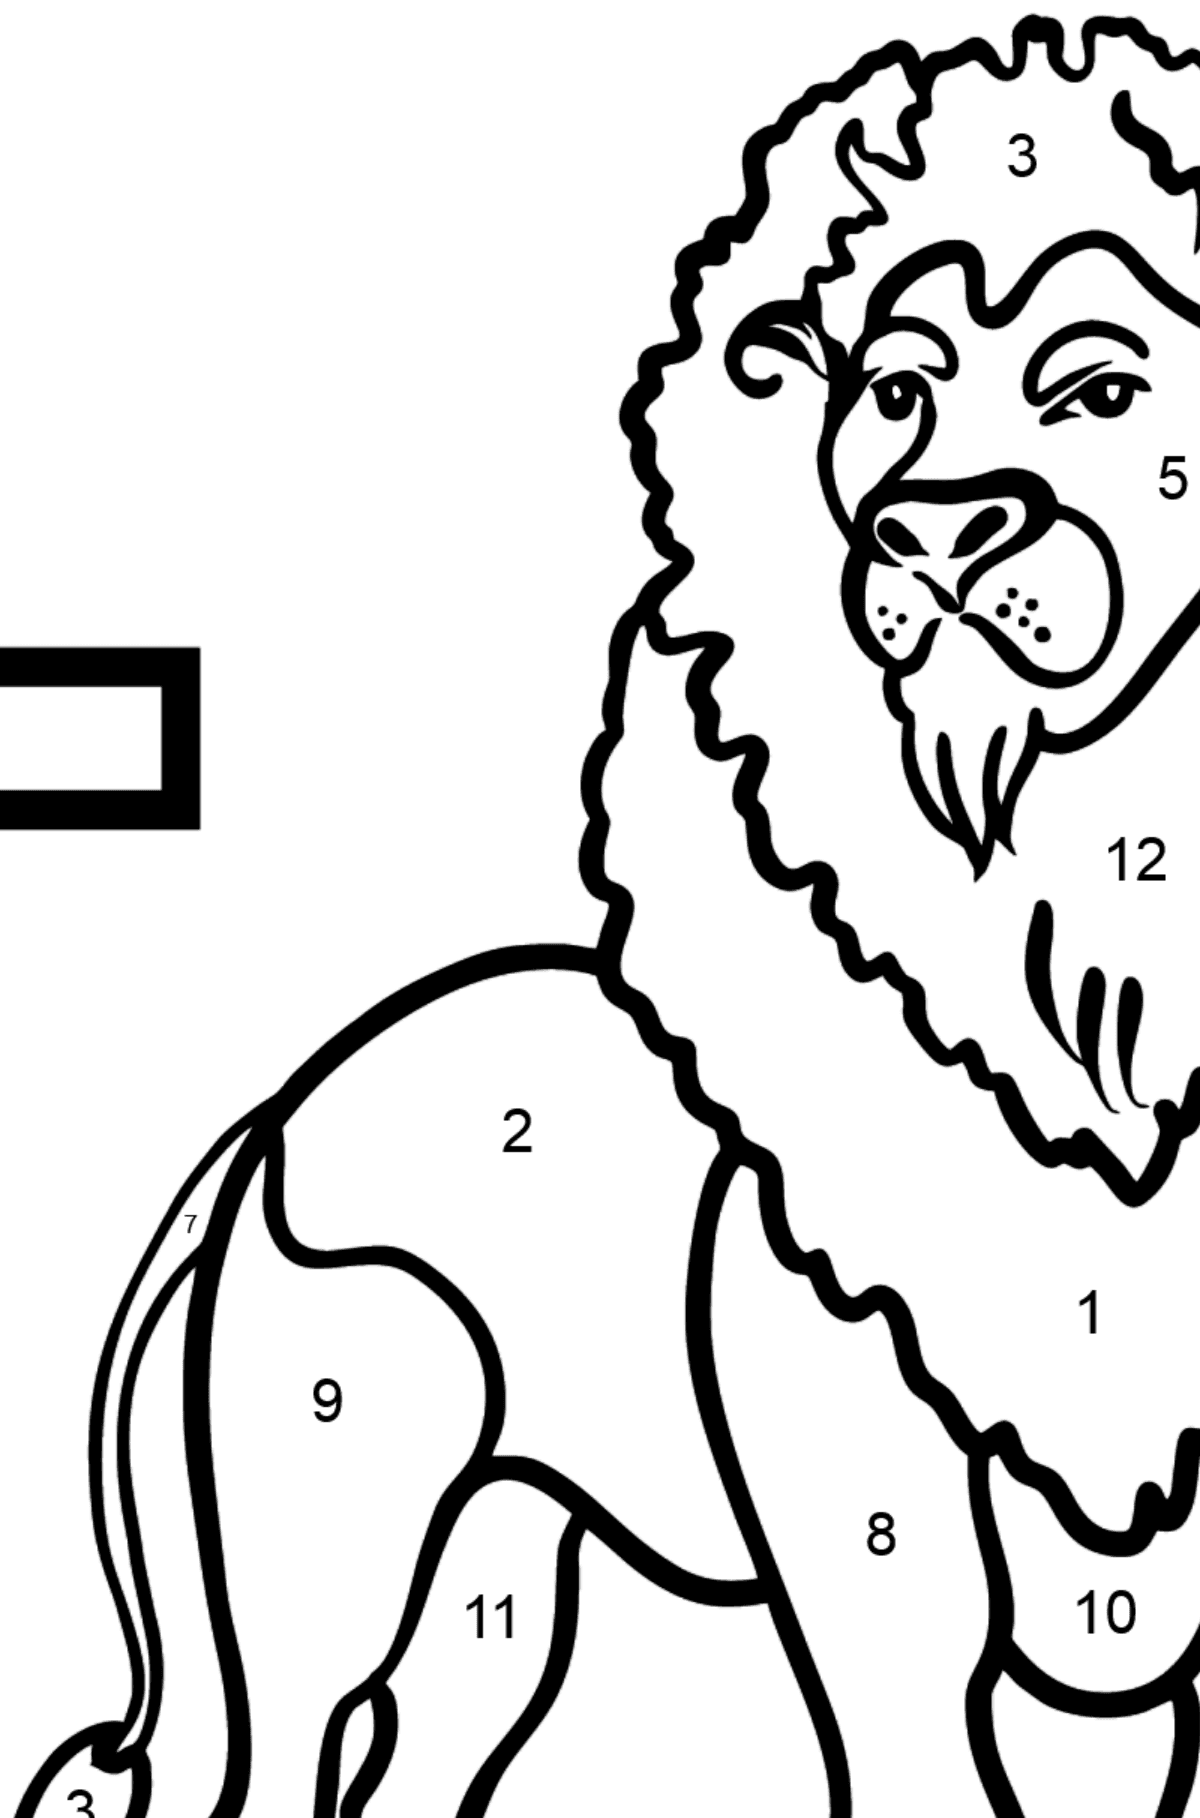 Portuguese Letter L coloring pages - LEÃO - Coloring by Numbers for Kids